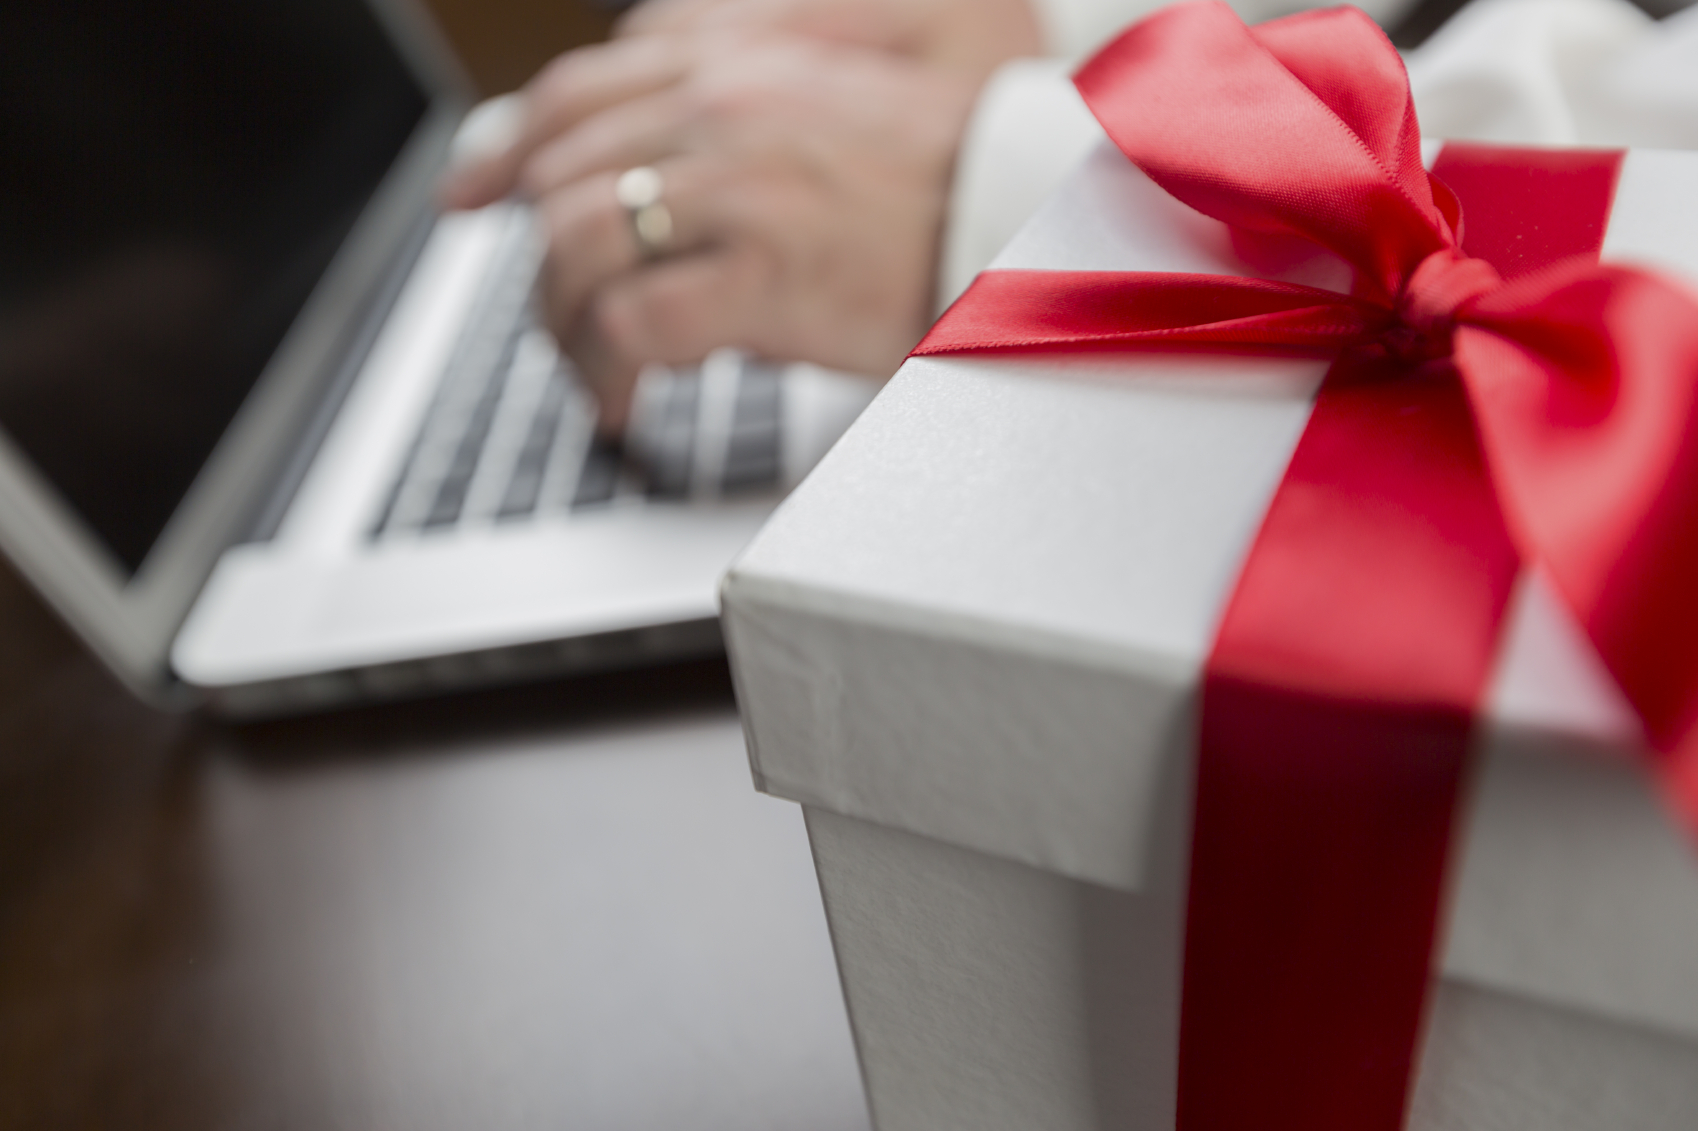 online-shopping-gift-box-with-red-bow.jpg 